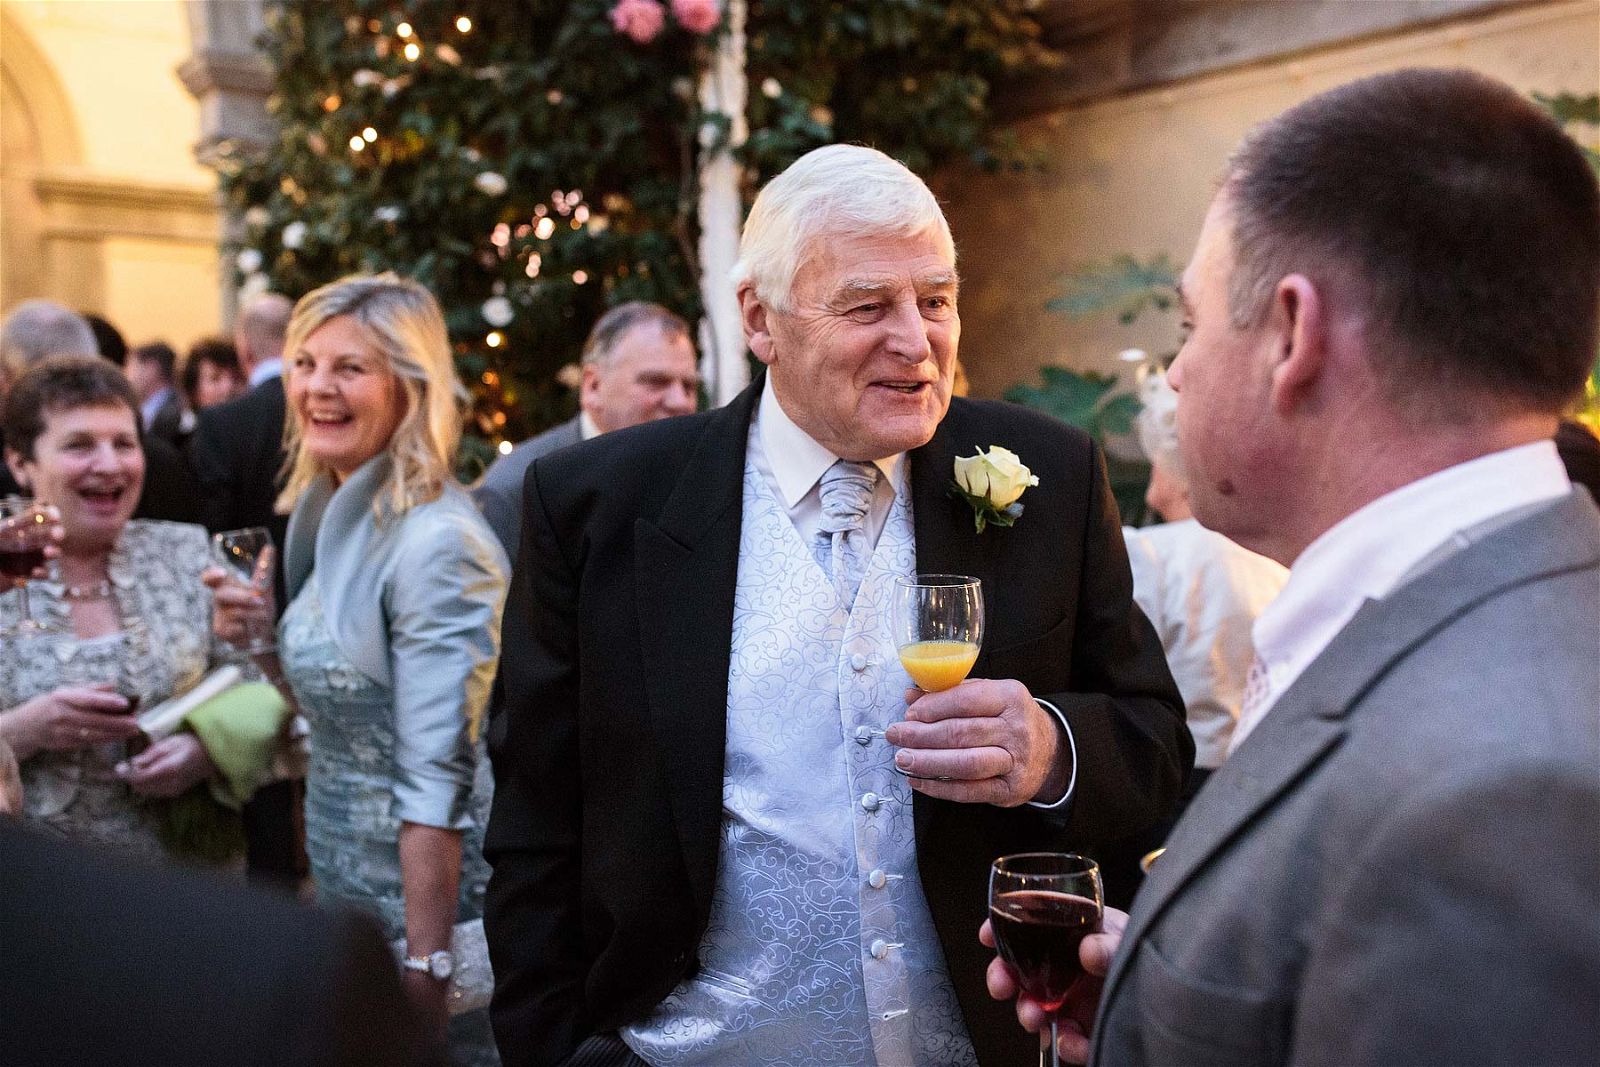 Reportage photographs as the guests enjoy the drinks reception at Sandon Hall in Stafford by Documentary Wedding Photographer Stuart James